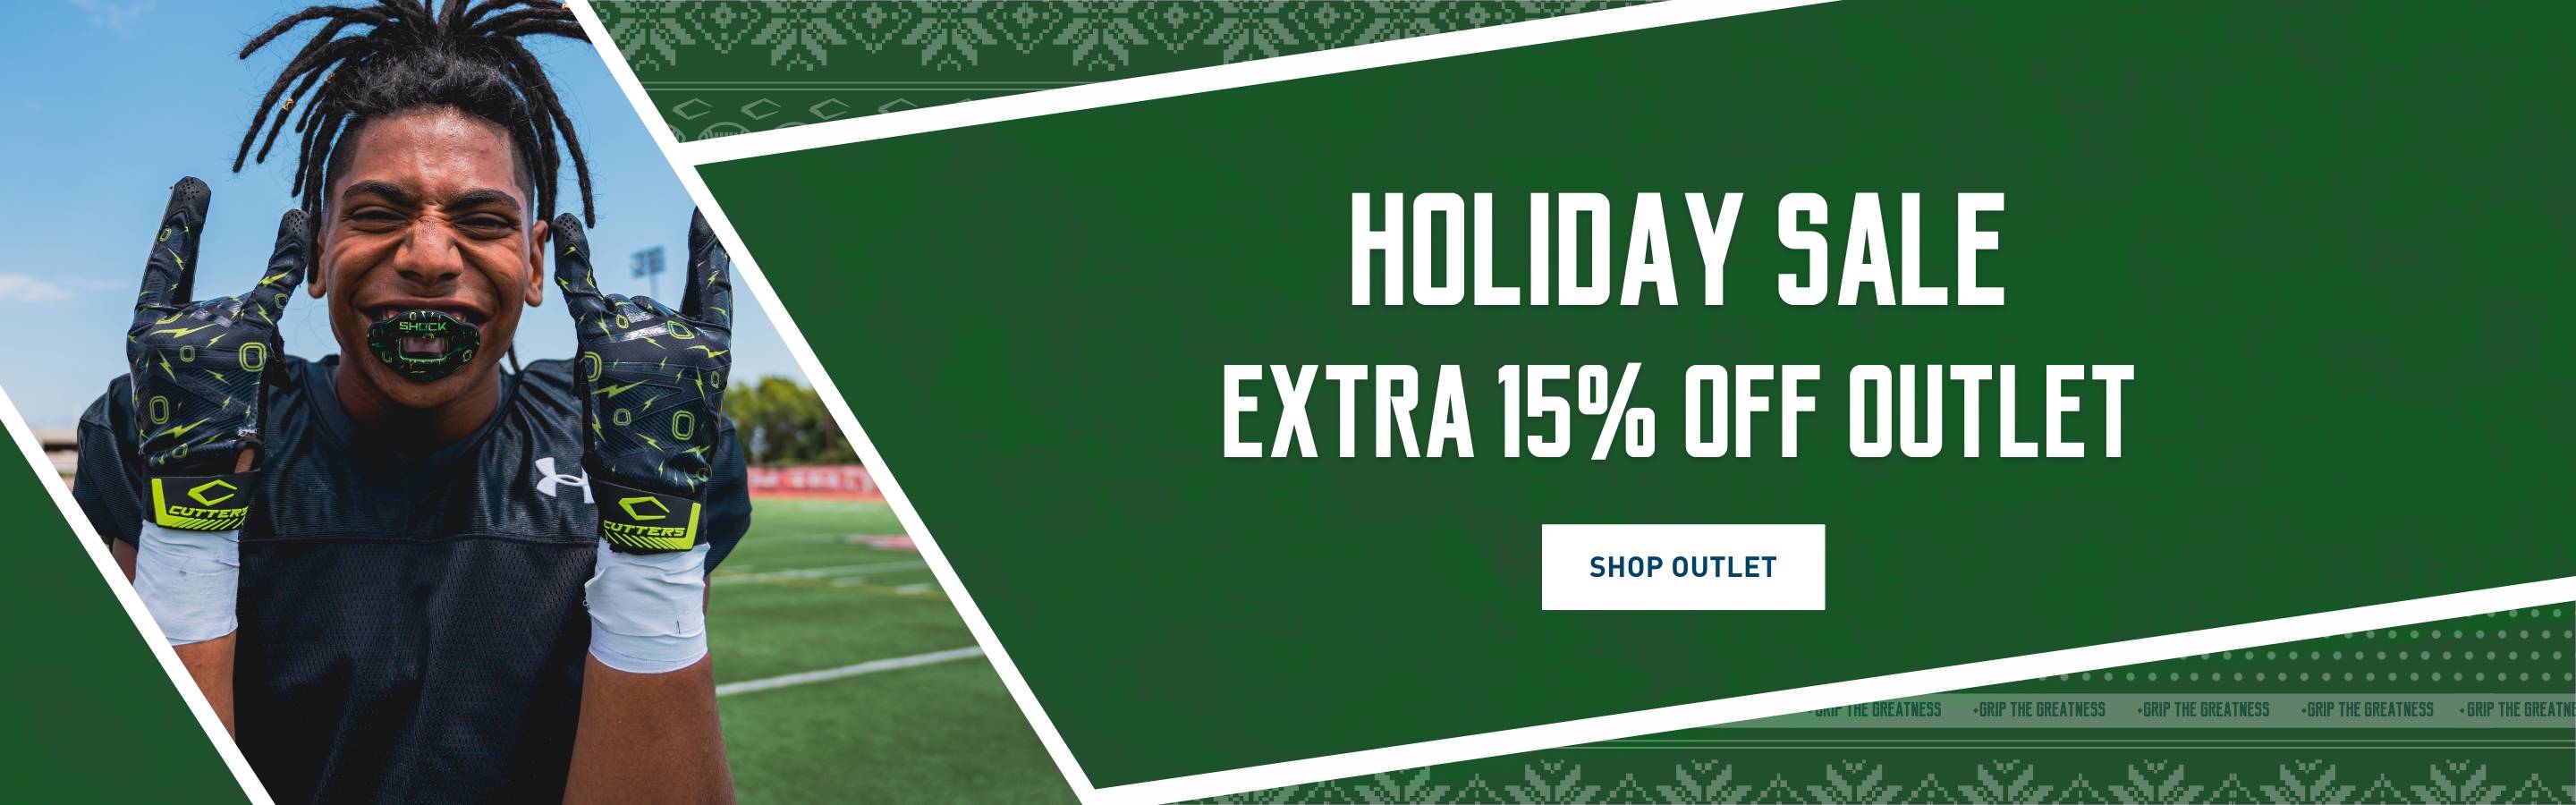 Holiday Sale. Extra 15% Off Outlet. Shop Outlet